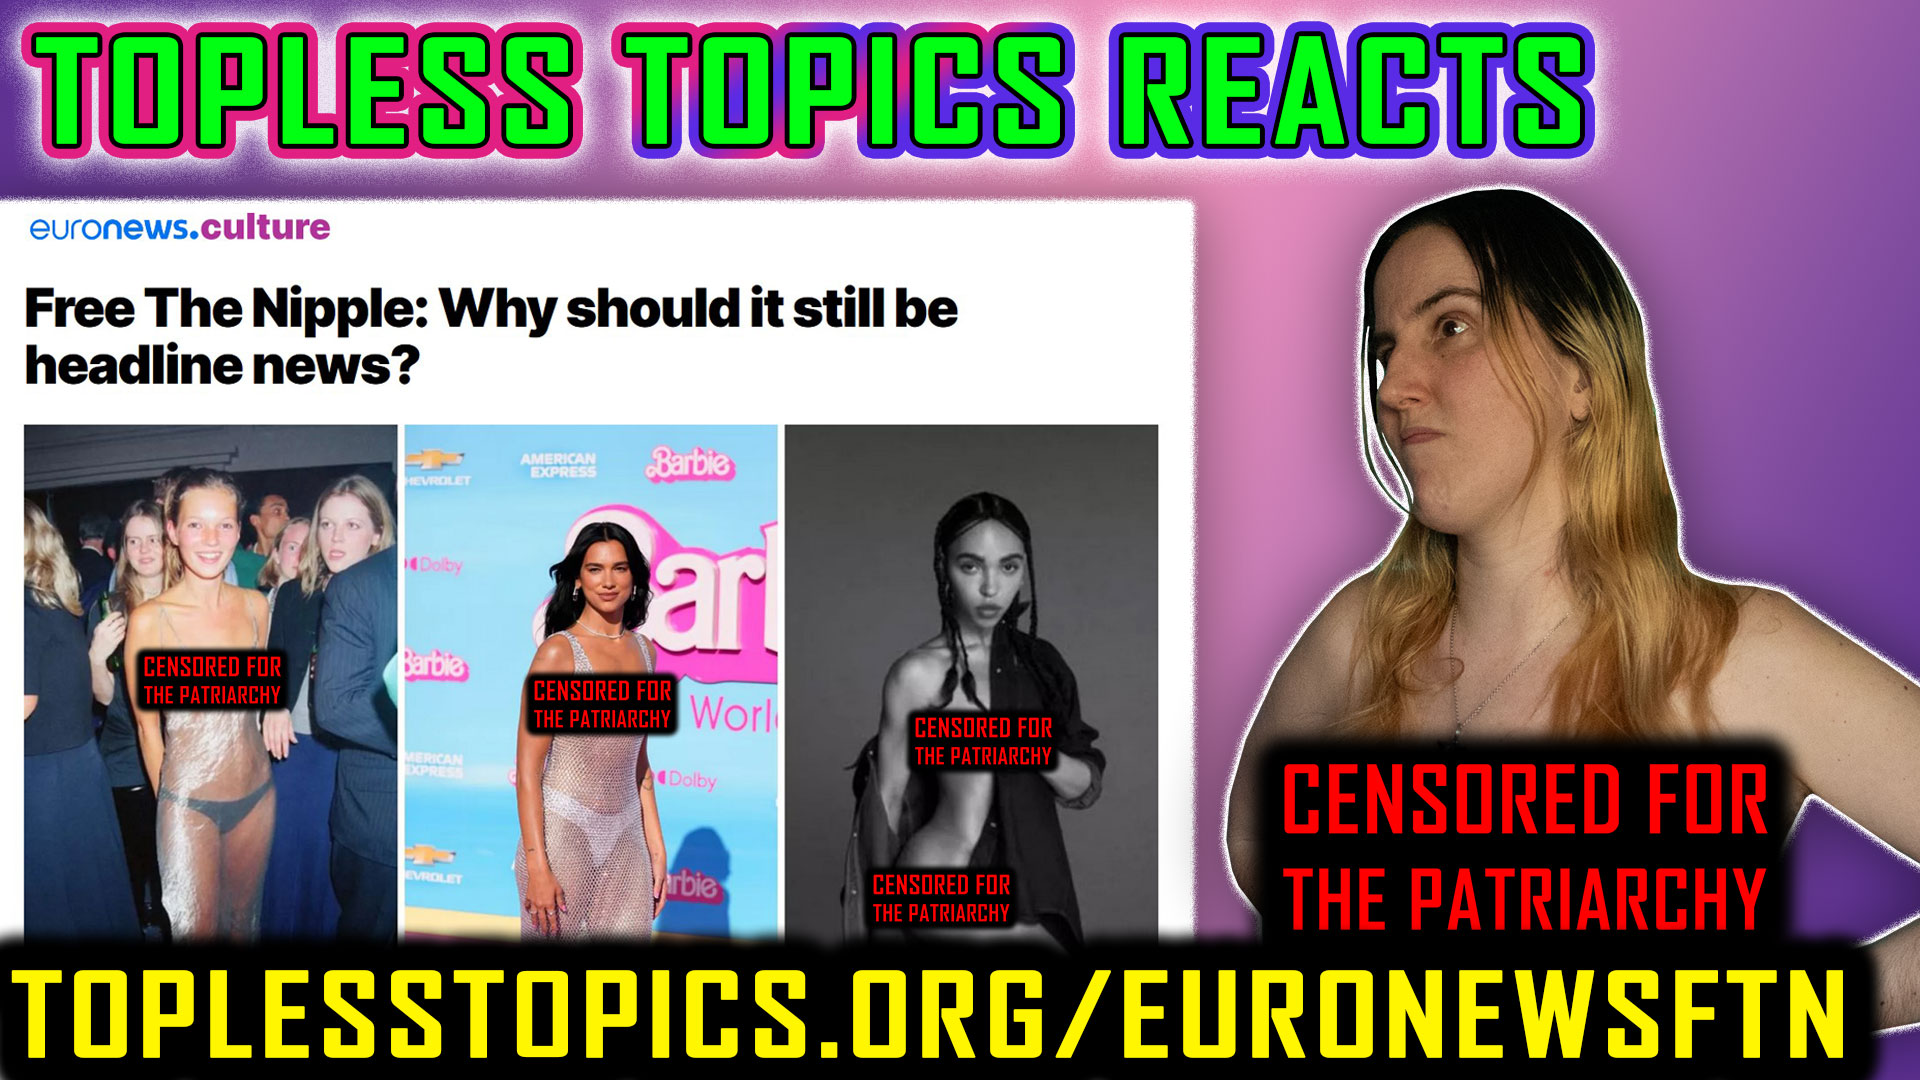 Why should Free The Nipple still be headline news? | Topless Topics Reacts